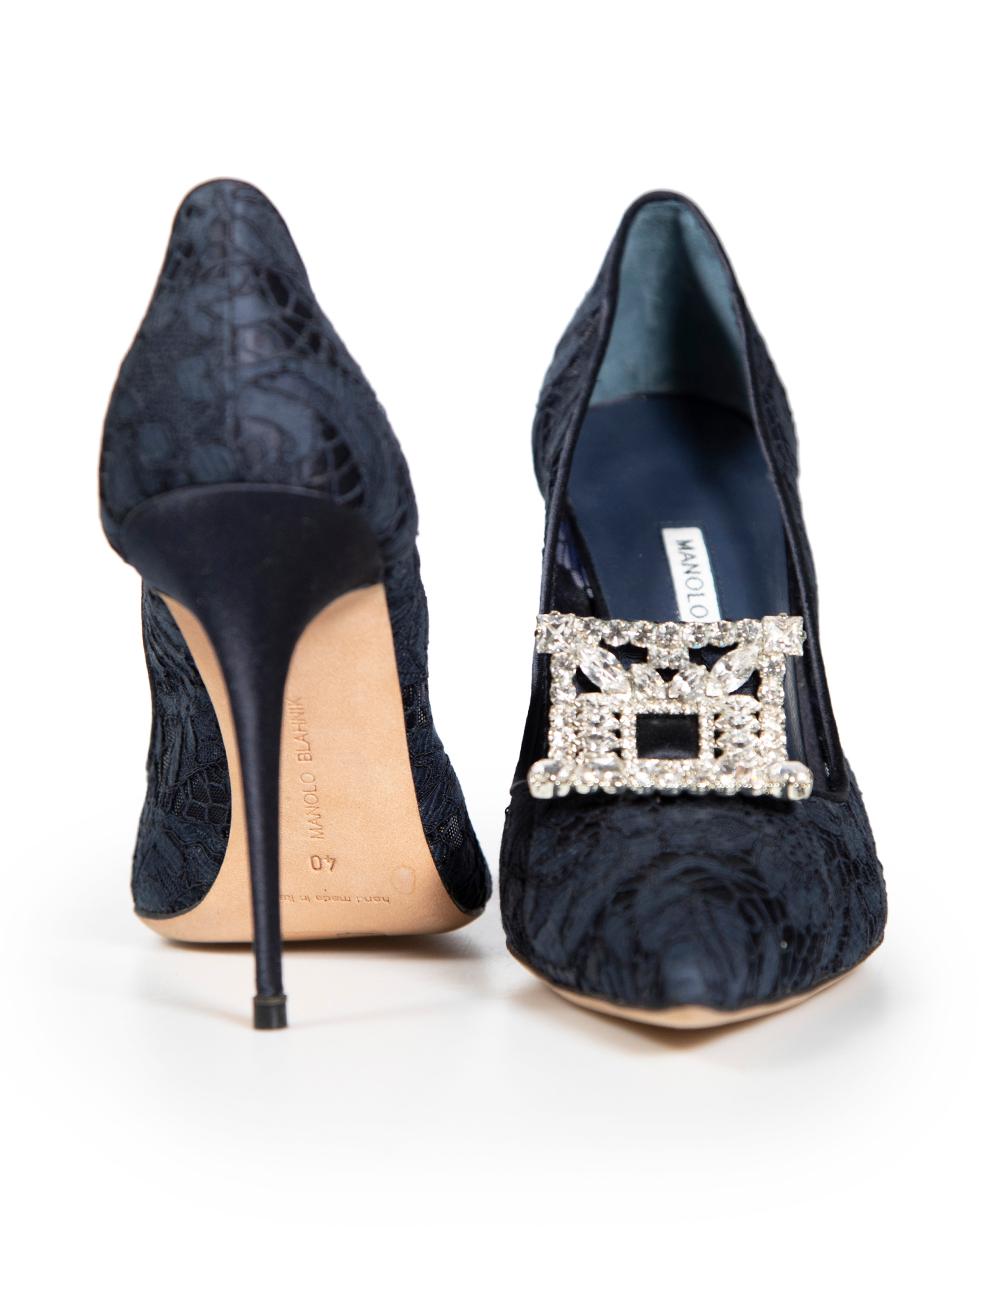 Manolo Blahnik Navy Lace Crystal Buckle Pumps In Excellent Condition For Sale In London, GB